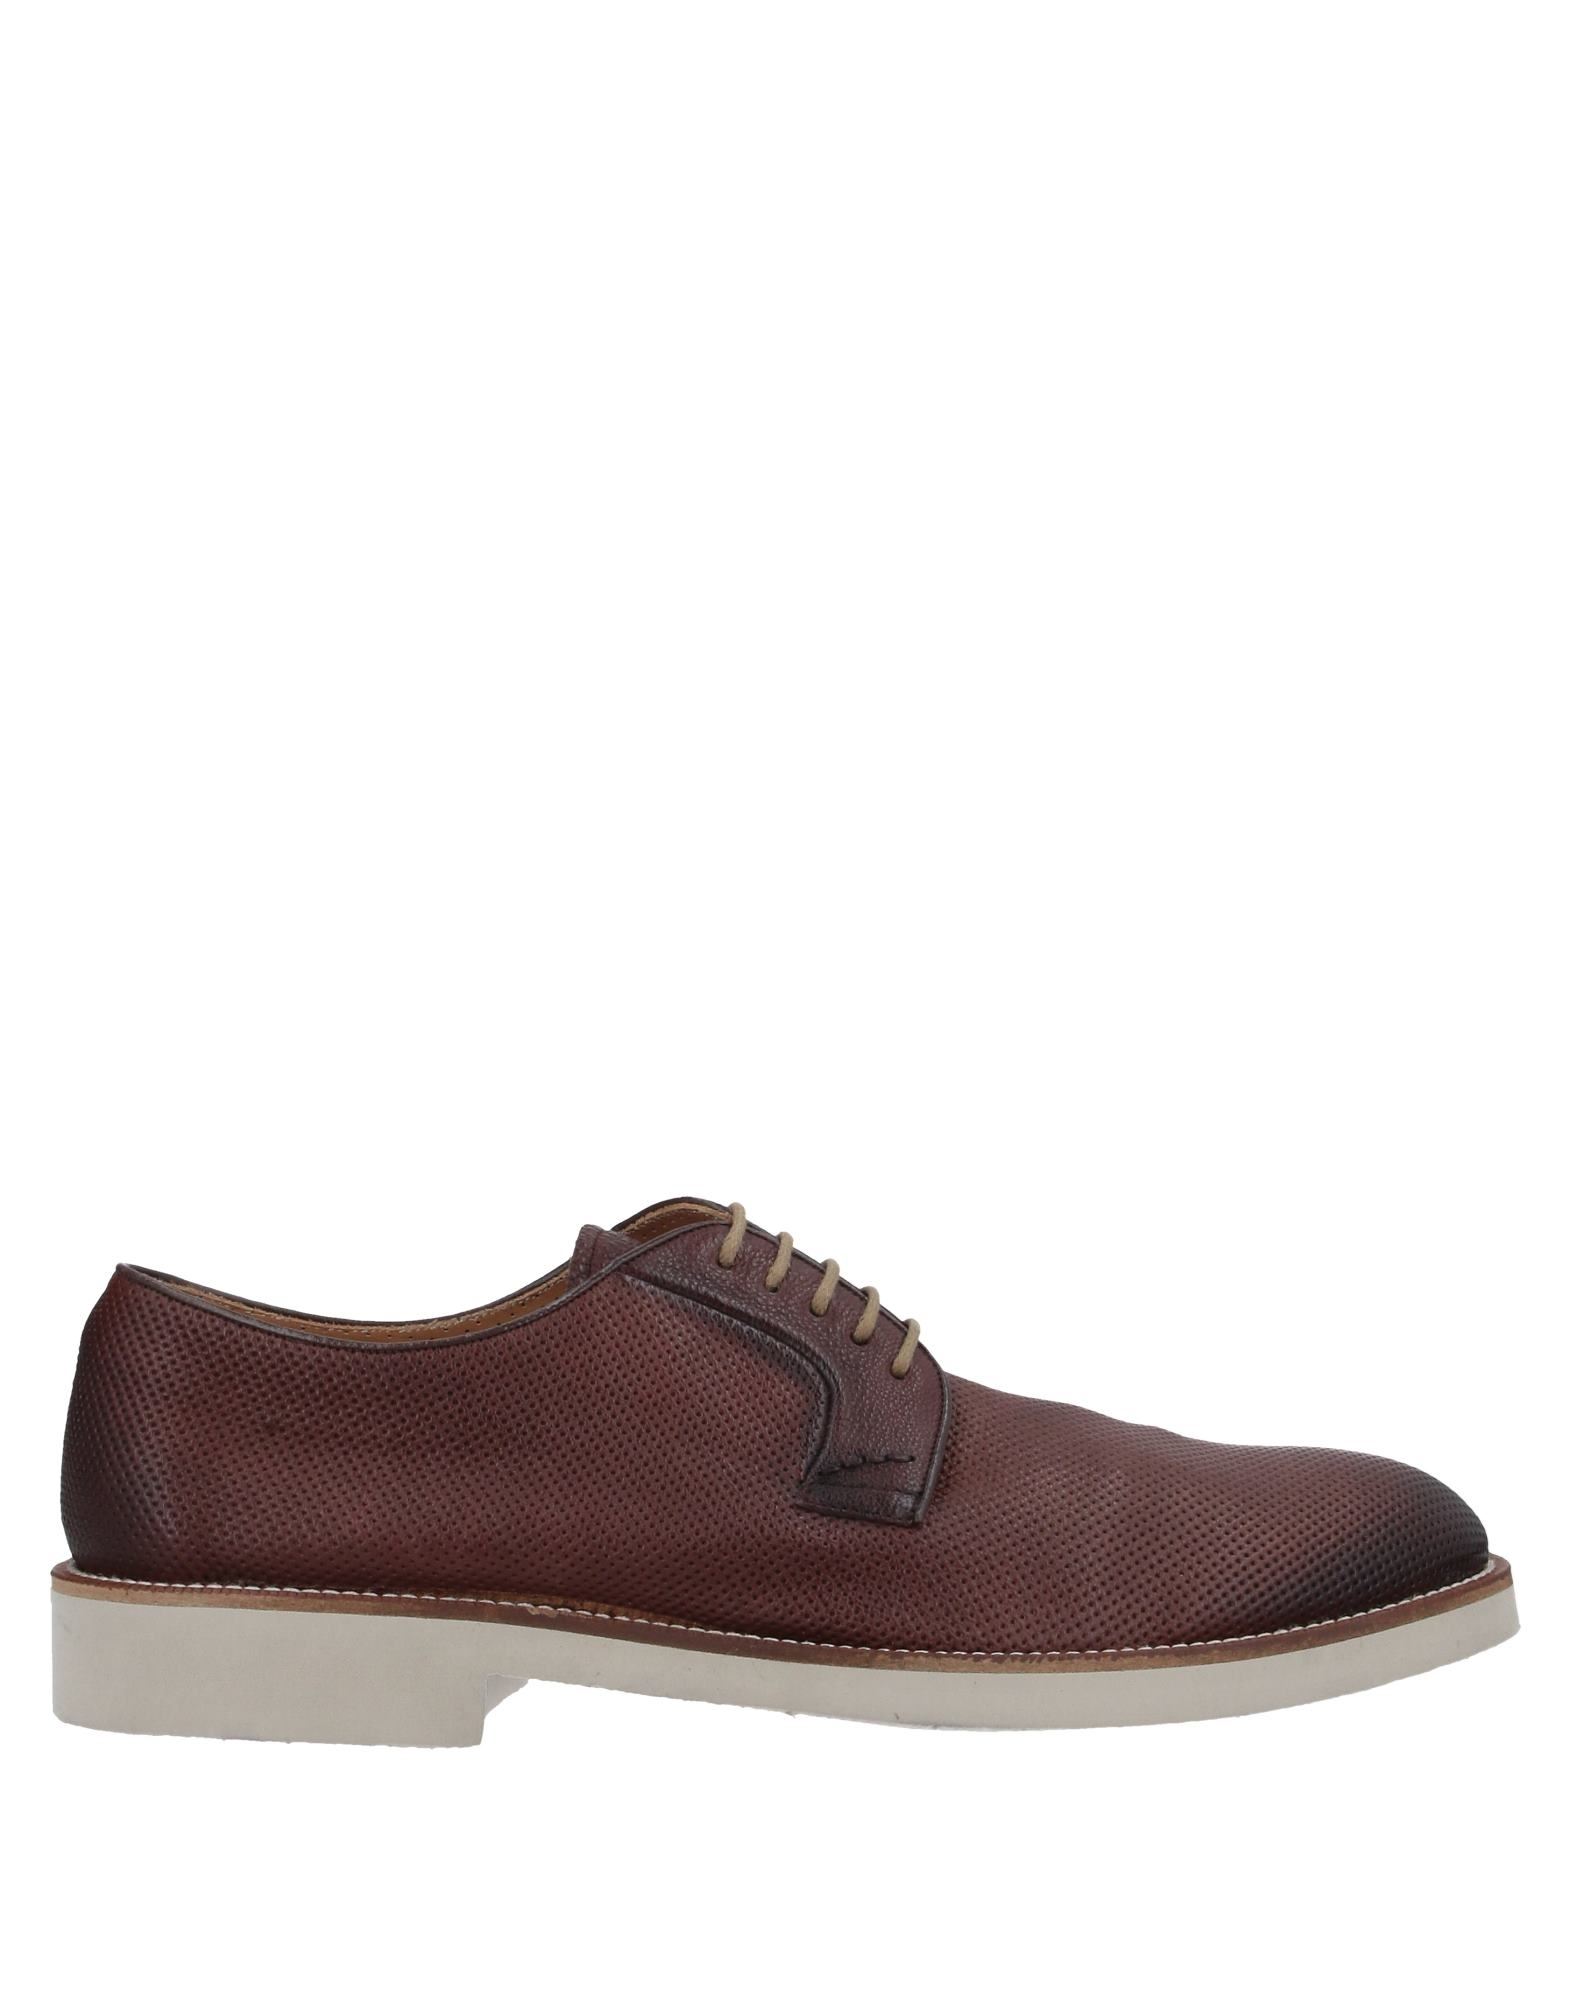 CALCE Lace-up shoes